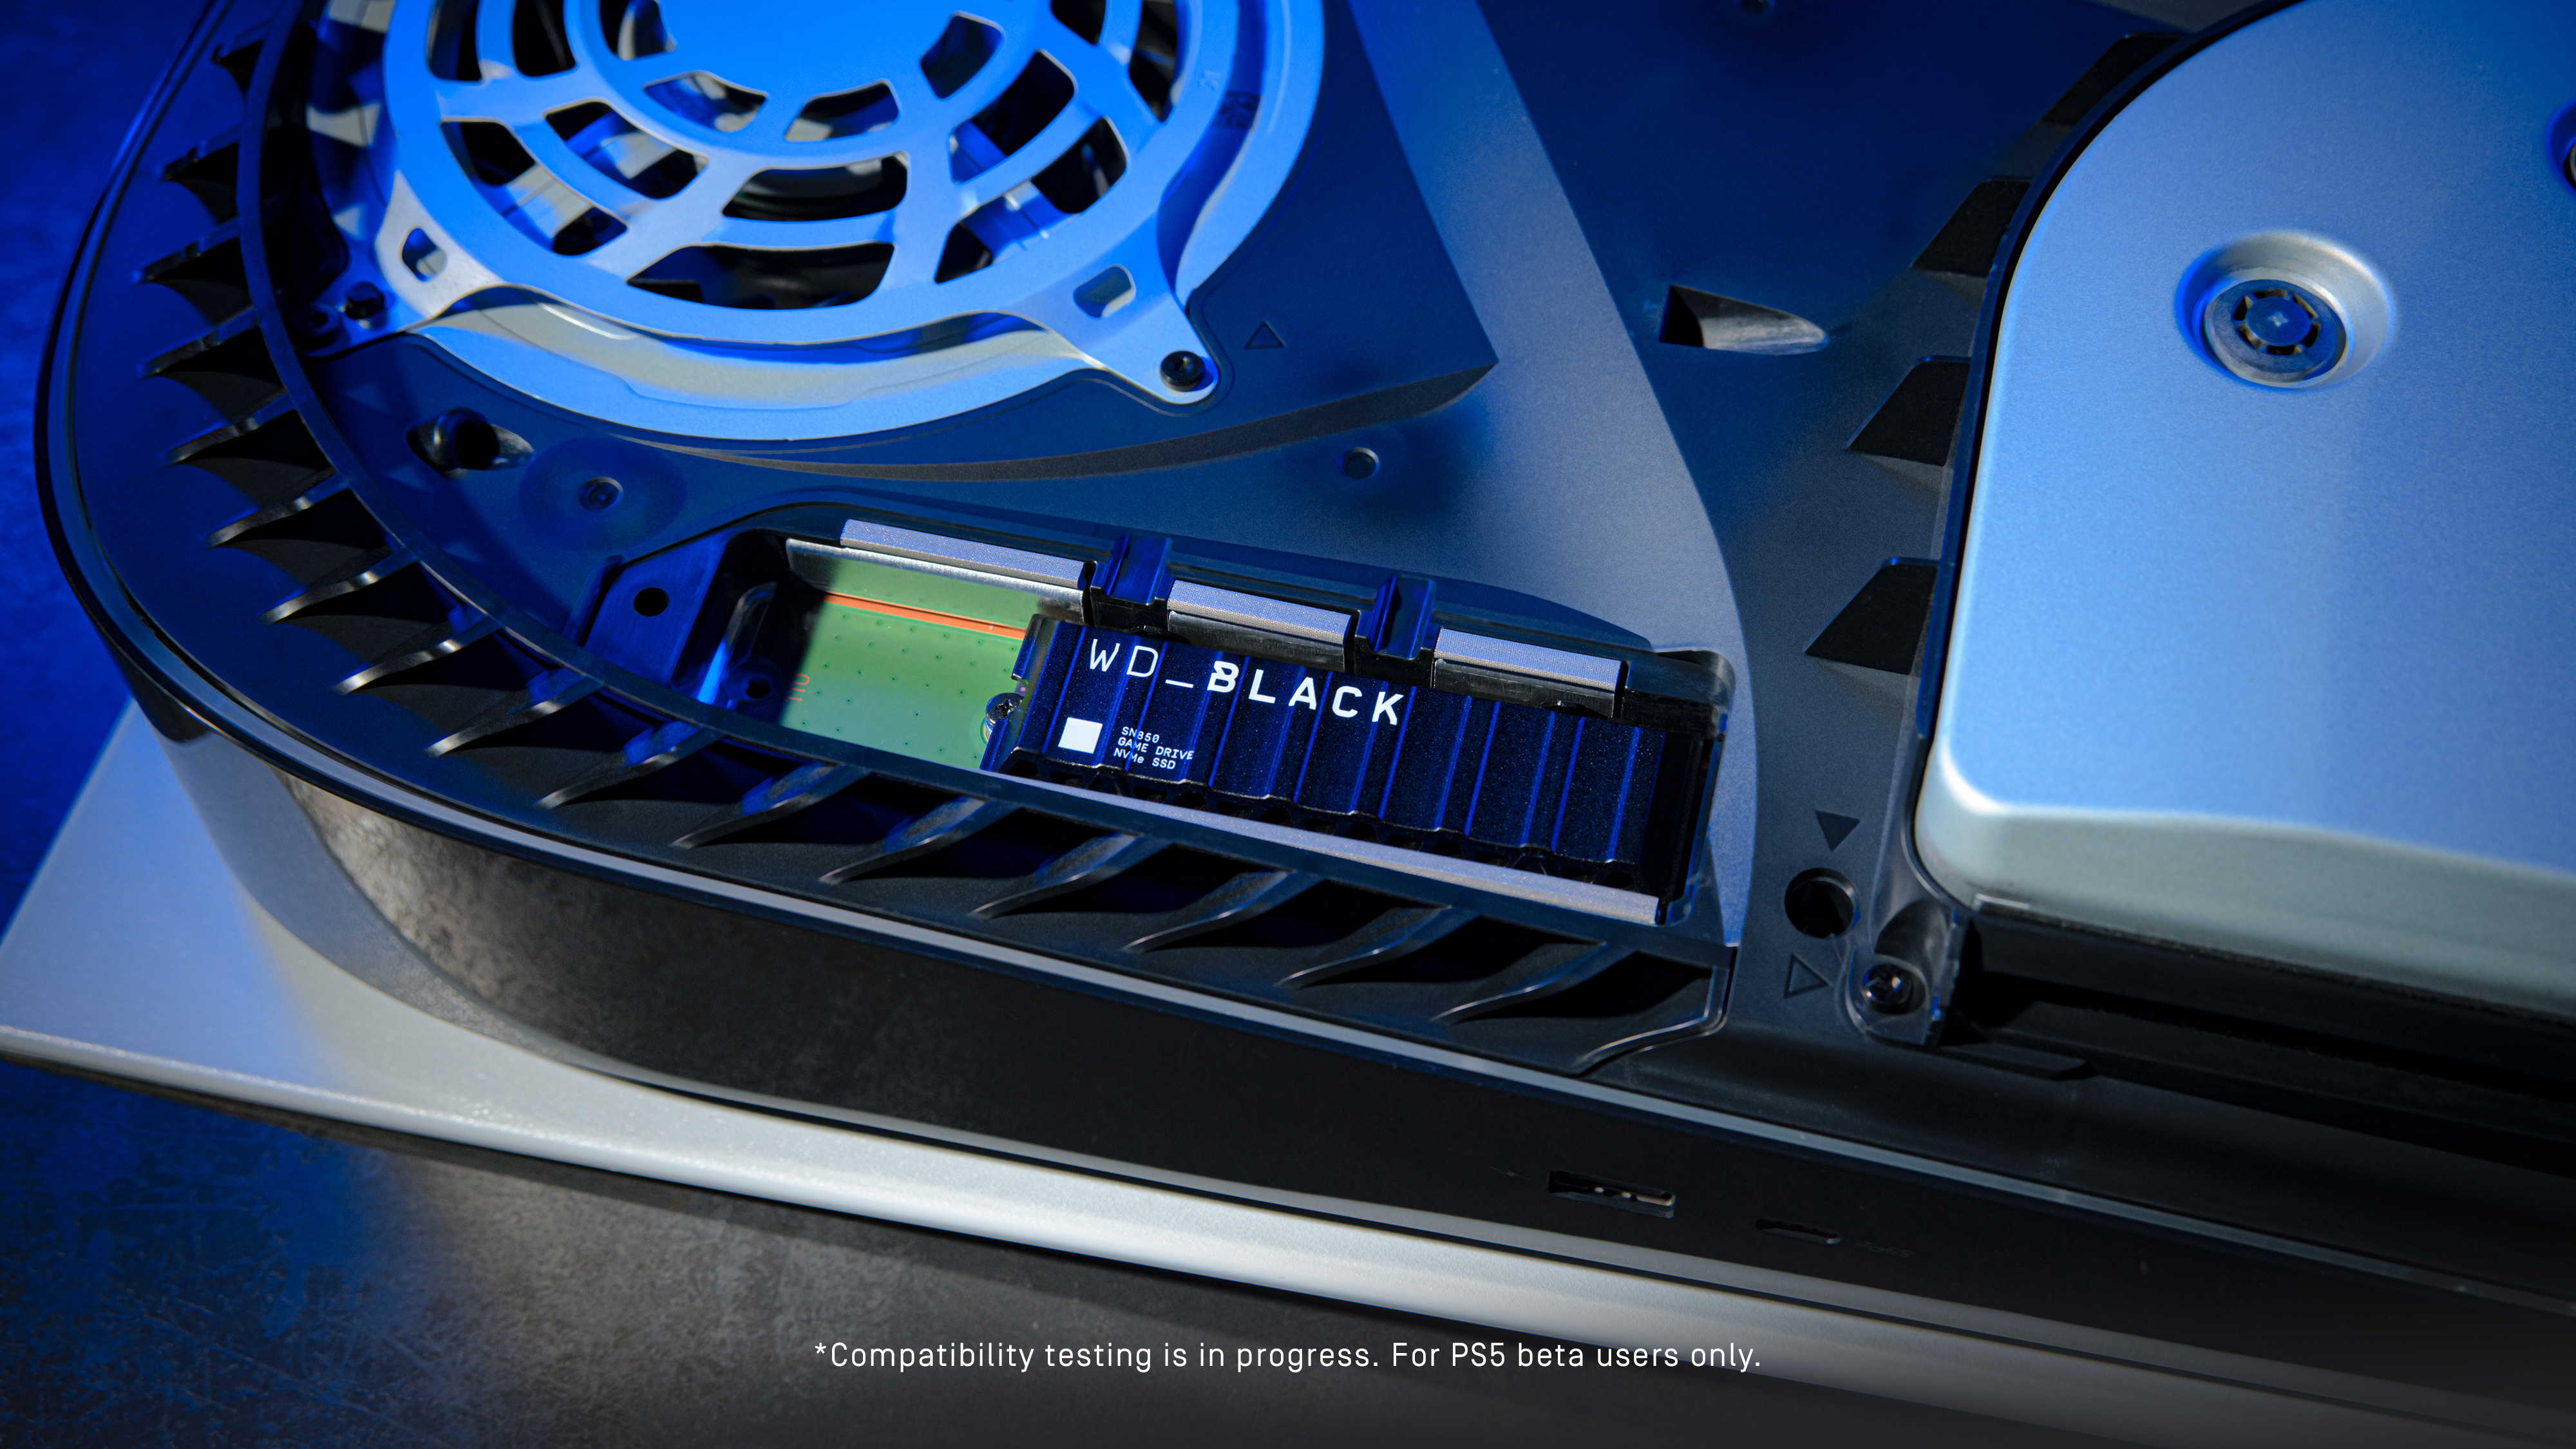 Wd Black Yep It Fits Available Now Get Our Wdblack Sn850 Nvme Ssd With Heatsink Here T Co Zhvcp6dv9u T Co Hth0dvighm Twitter